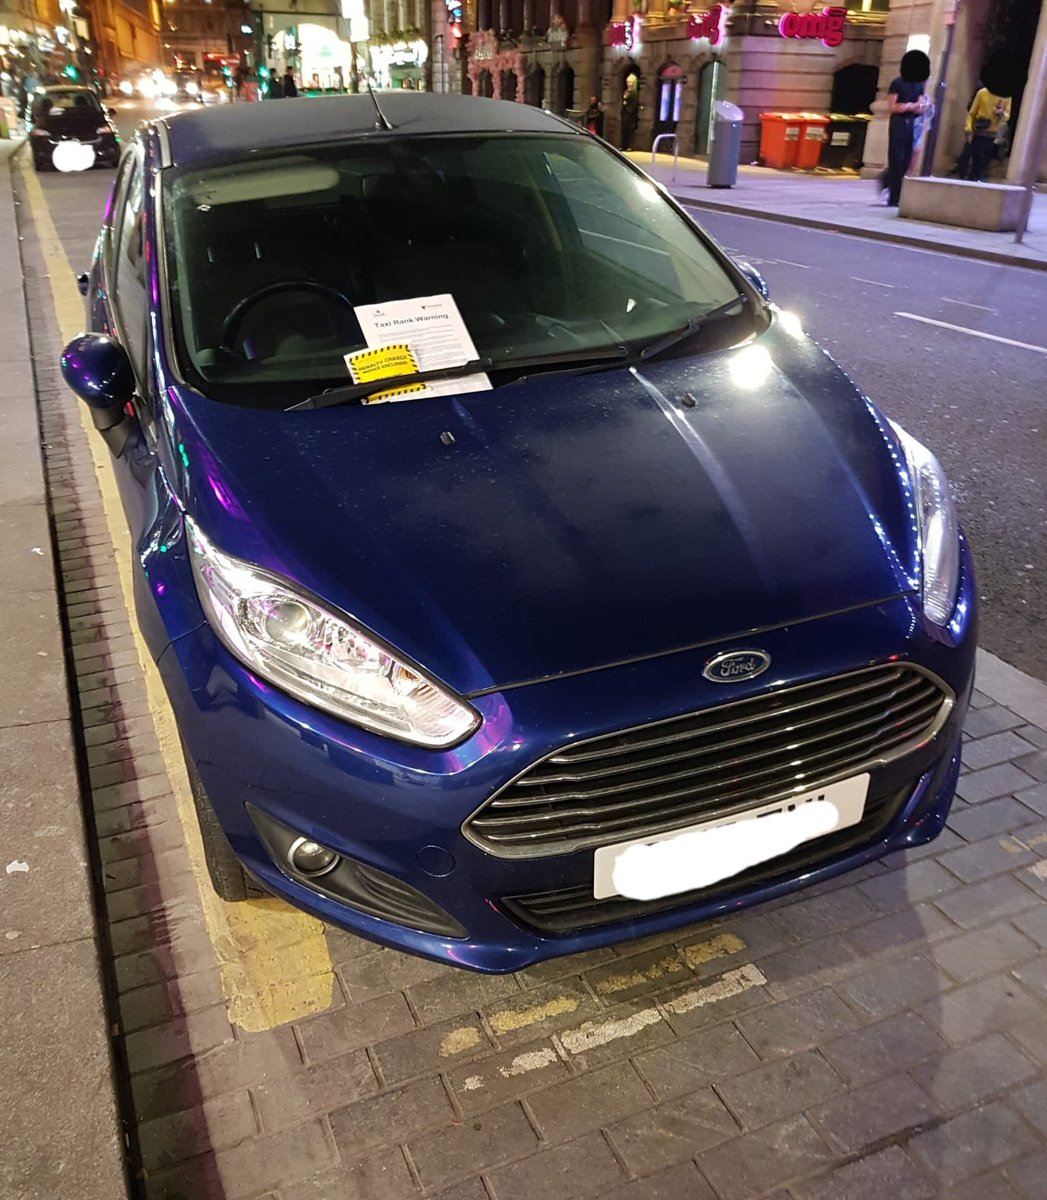 Licensing and Merseyside Police Officers have issued warning notices on vehicles illegally parked on Victoria St Taxi Rank advising owners that their vehicle can be removed due to the obstruction caused. Only LCC Taxis plying for hire are permitted to use the Taxi Rank.